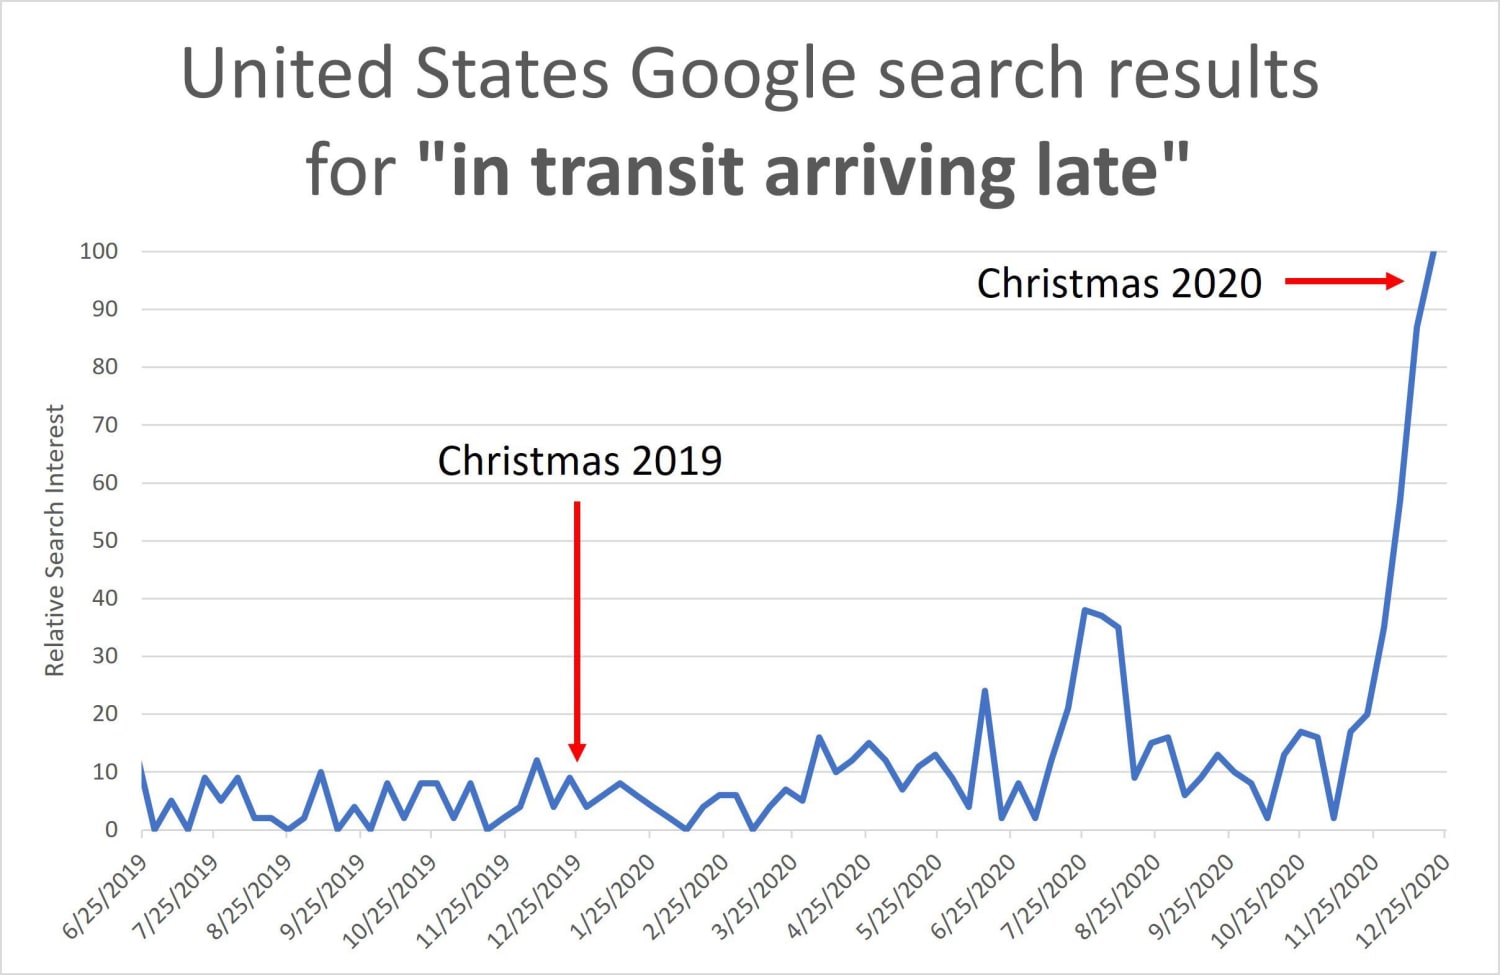 US Google search results for “in transit arriving late”, the USPS’s catch-all for mail or packages arriving late.